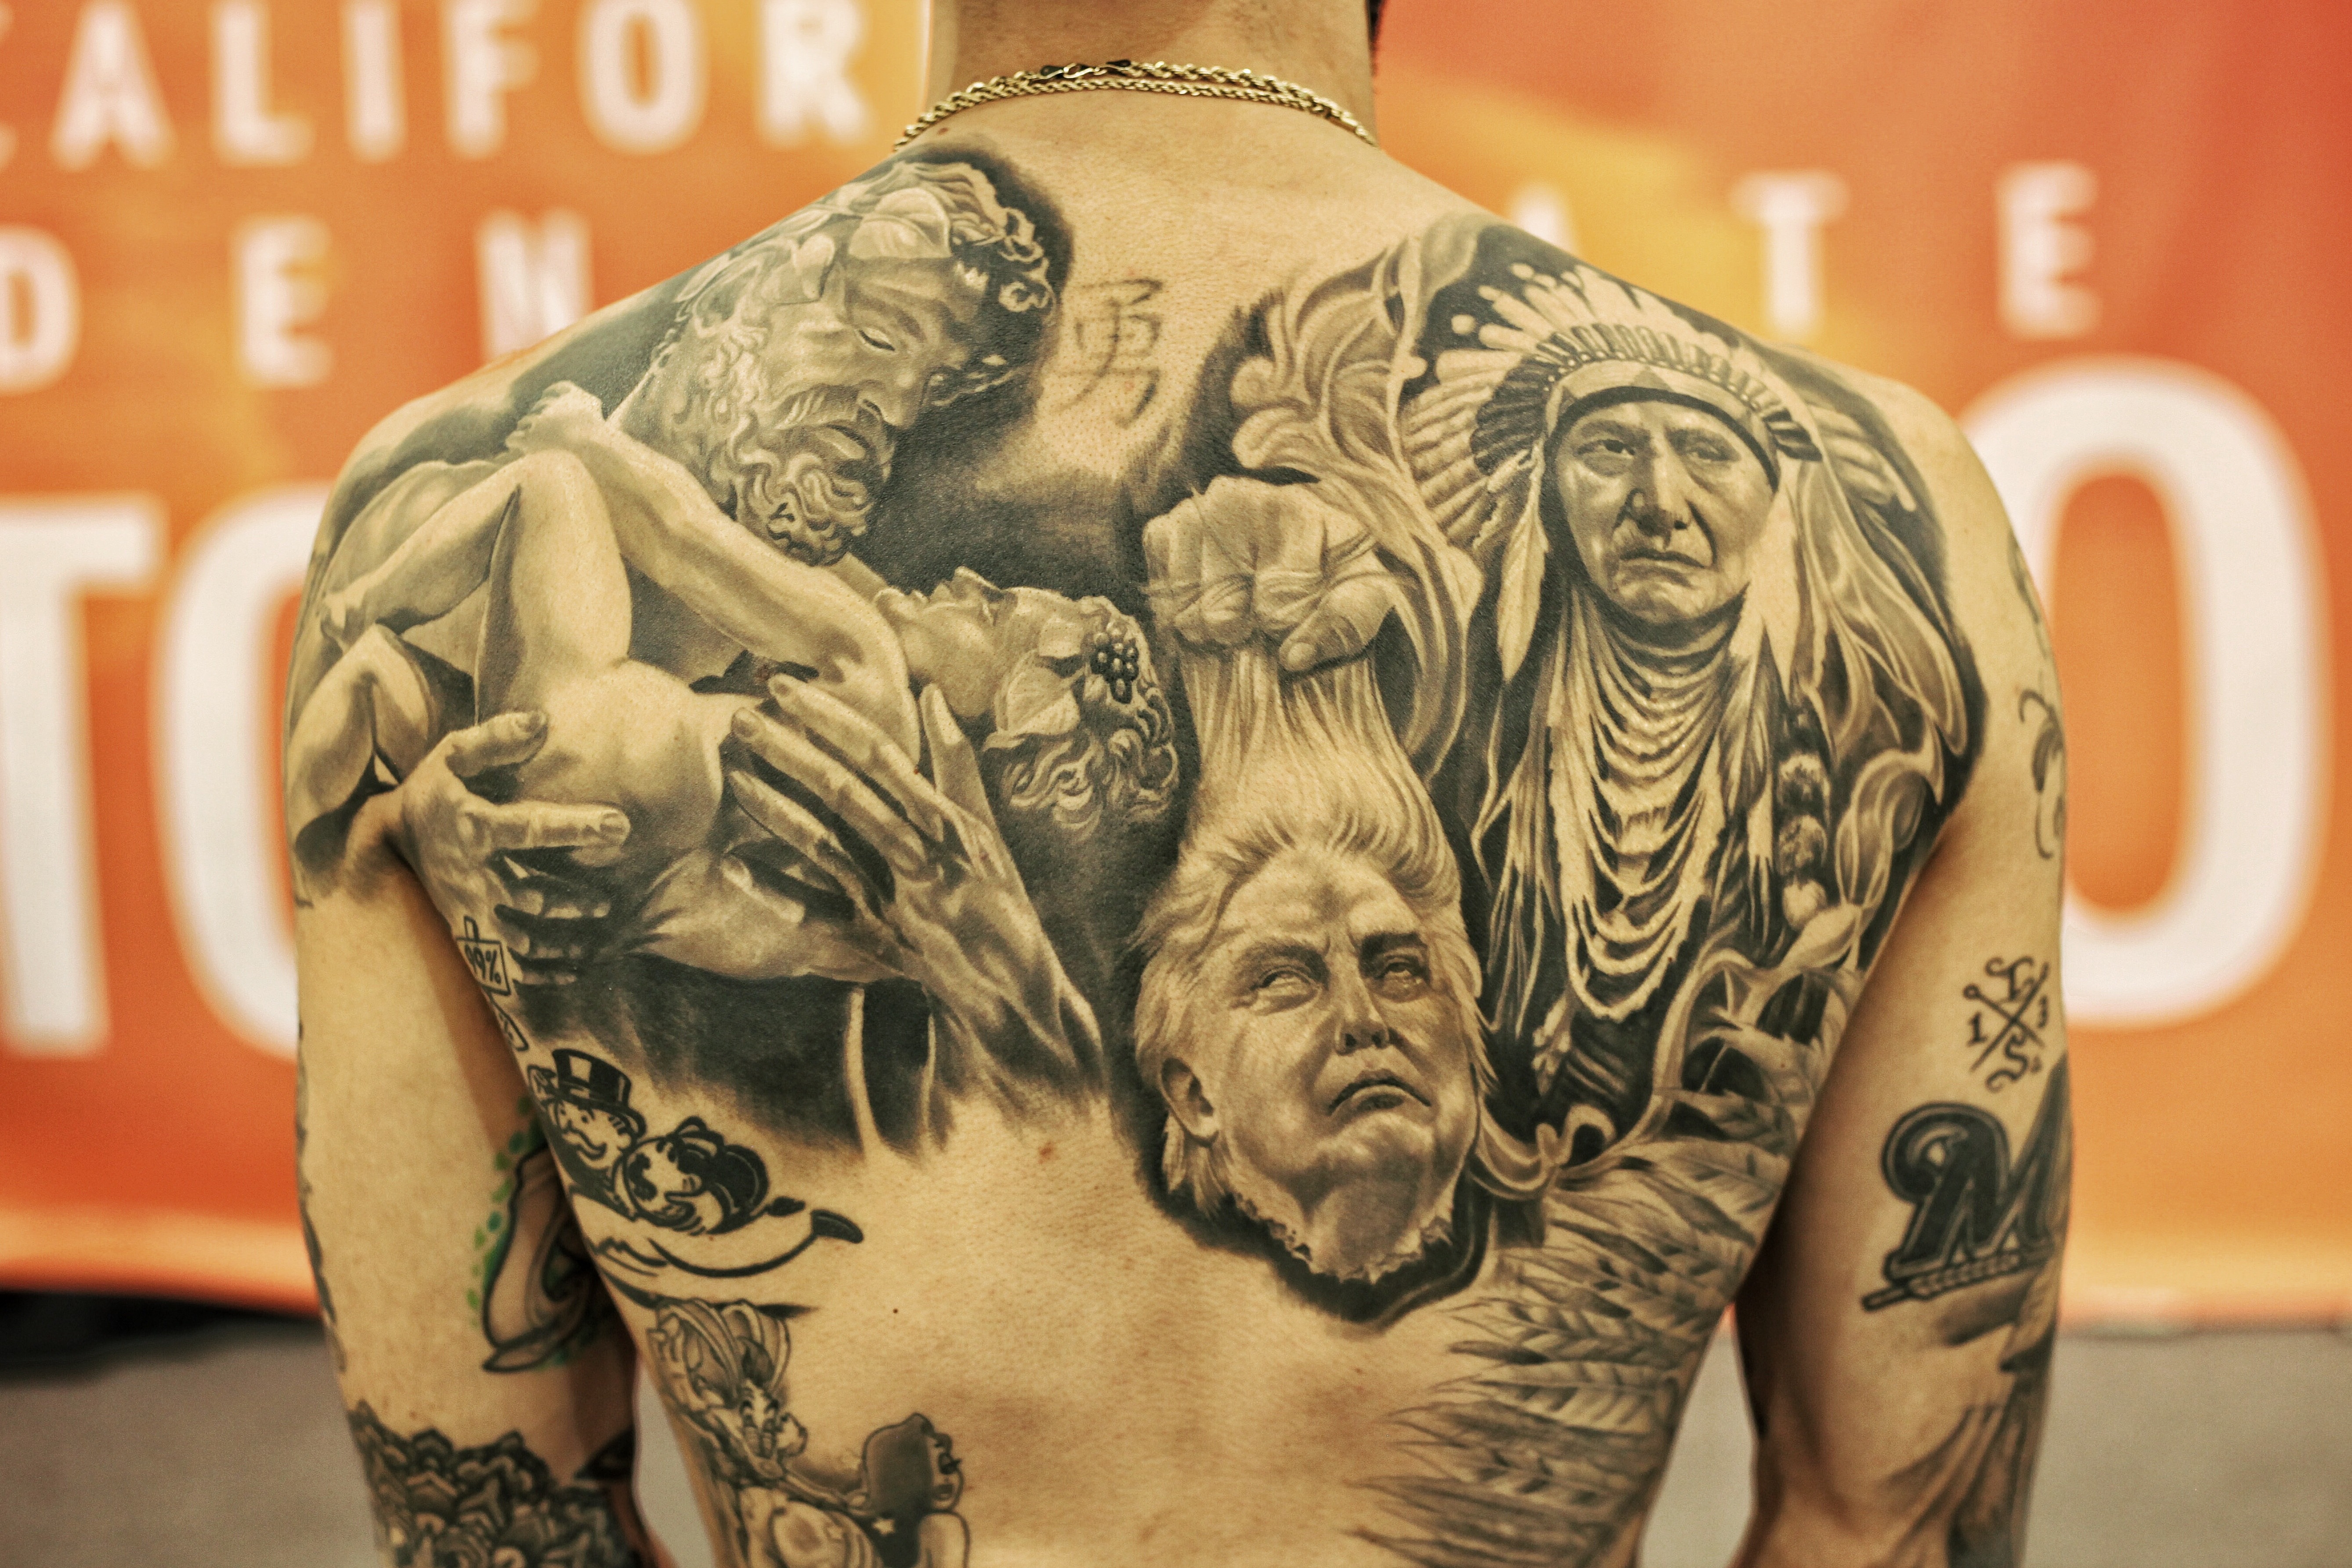 Tattoo community adjusts to COVID19 safety measures at Golden State Tattoo  Expo  Talon Marks